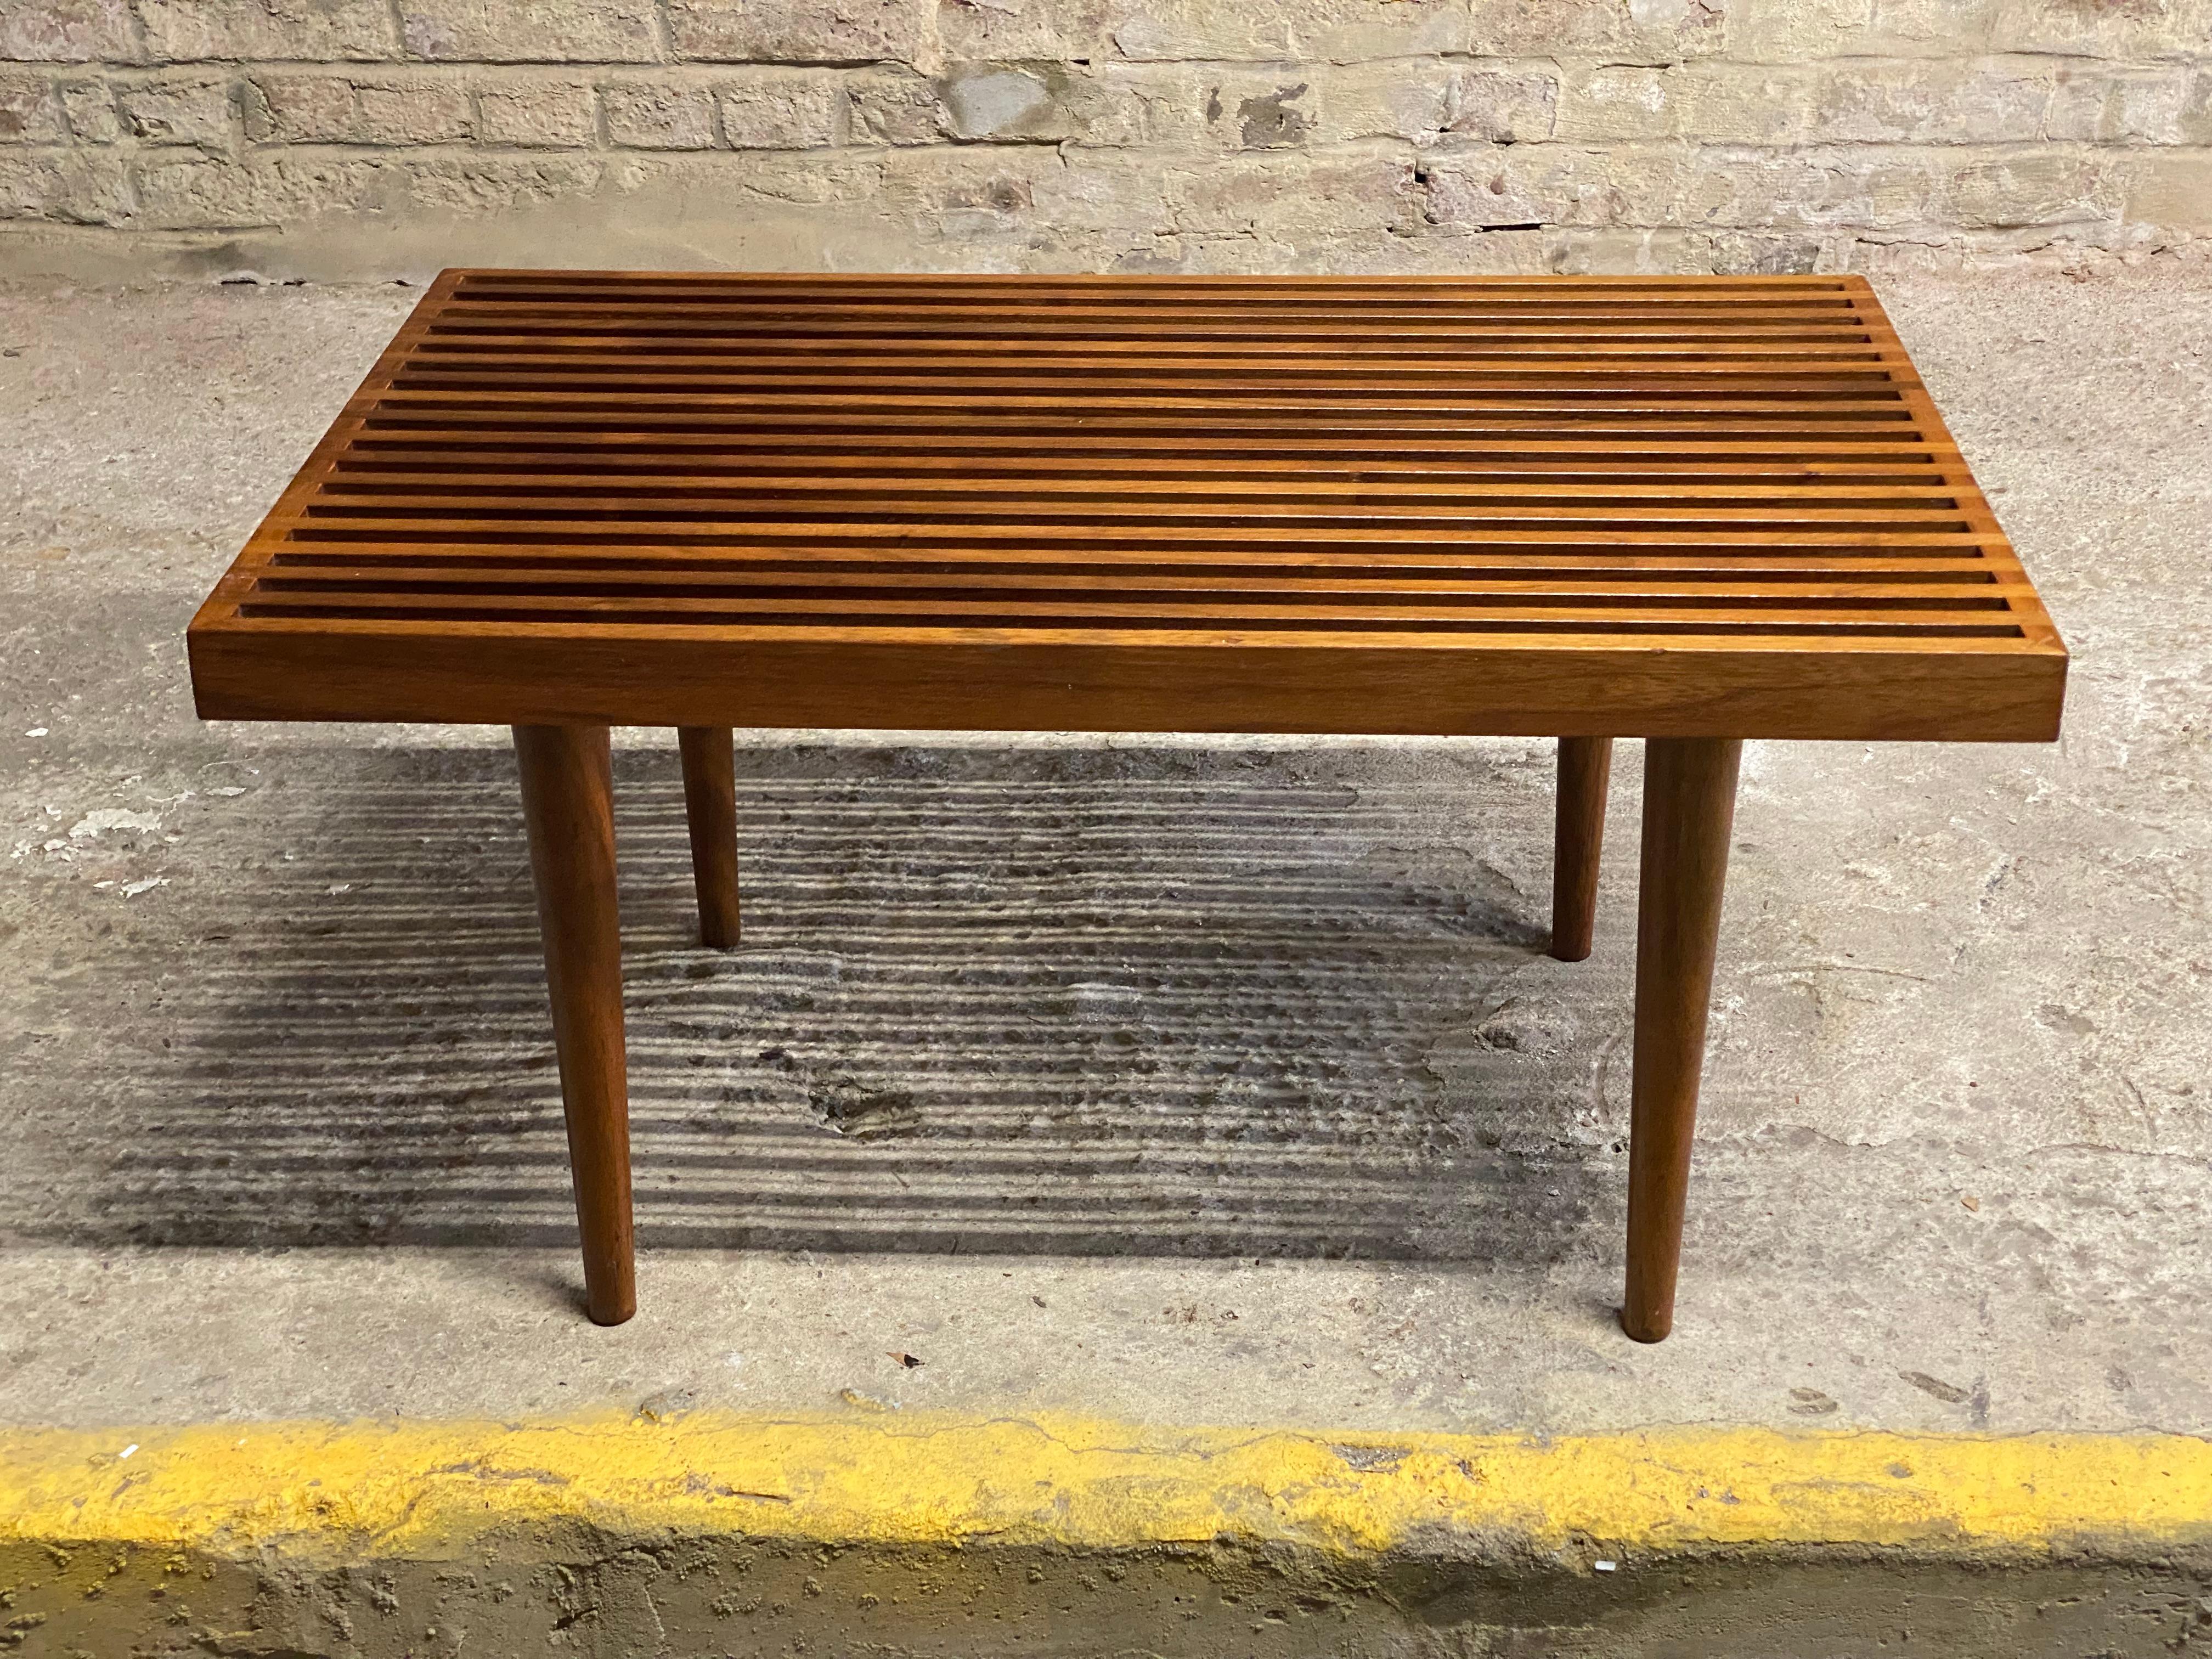 A Mel Smilow (1922-2002) designed solid walnut slat table. Wonderful oiled walnut featuring that signature splined corners, cross cut color contrast sides and removable tapered legs. Flat pack design. These are great accent tables or small benches